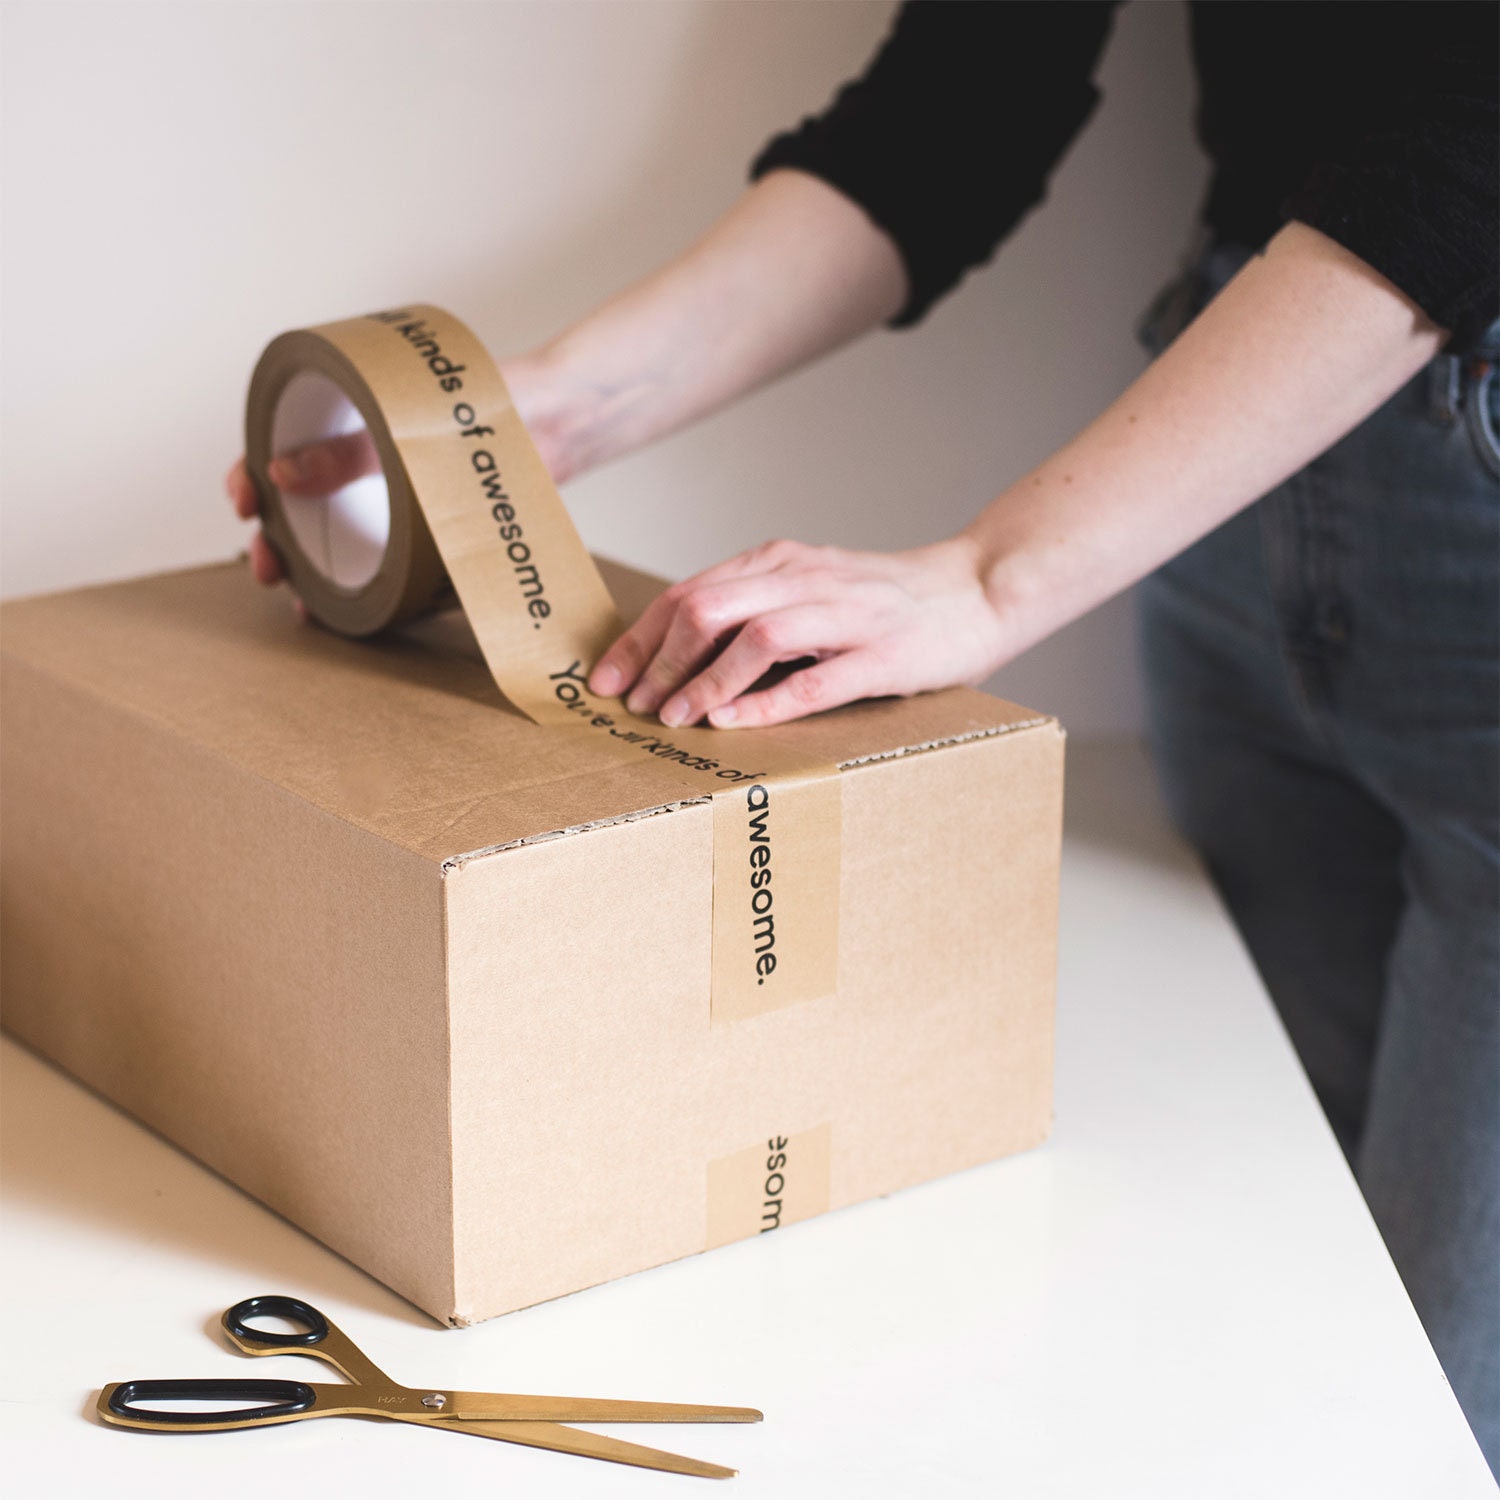 Best Kraft Paper Tape for Packaging, Labeling, and More –